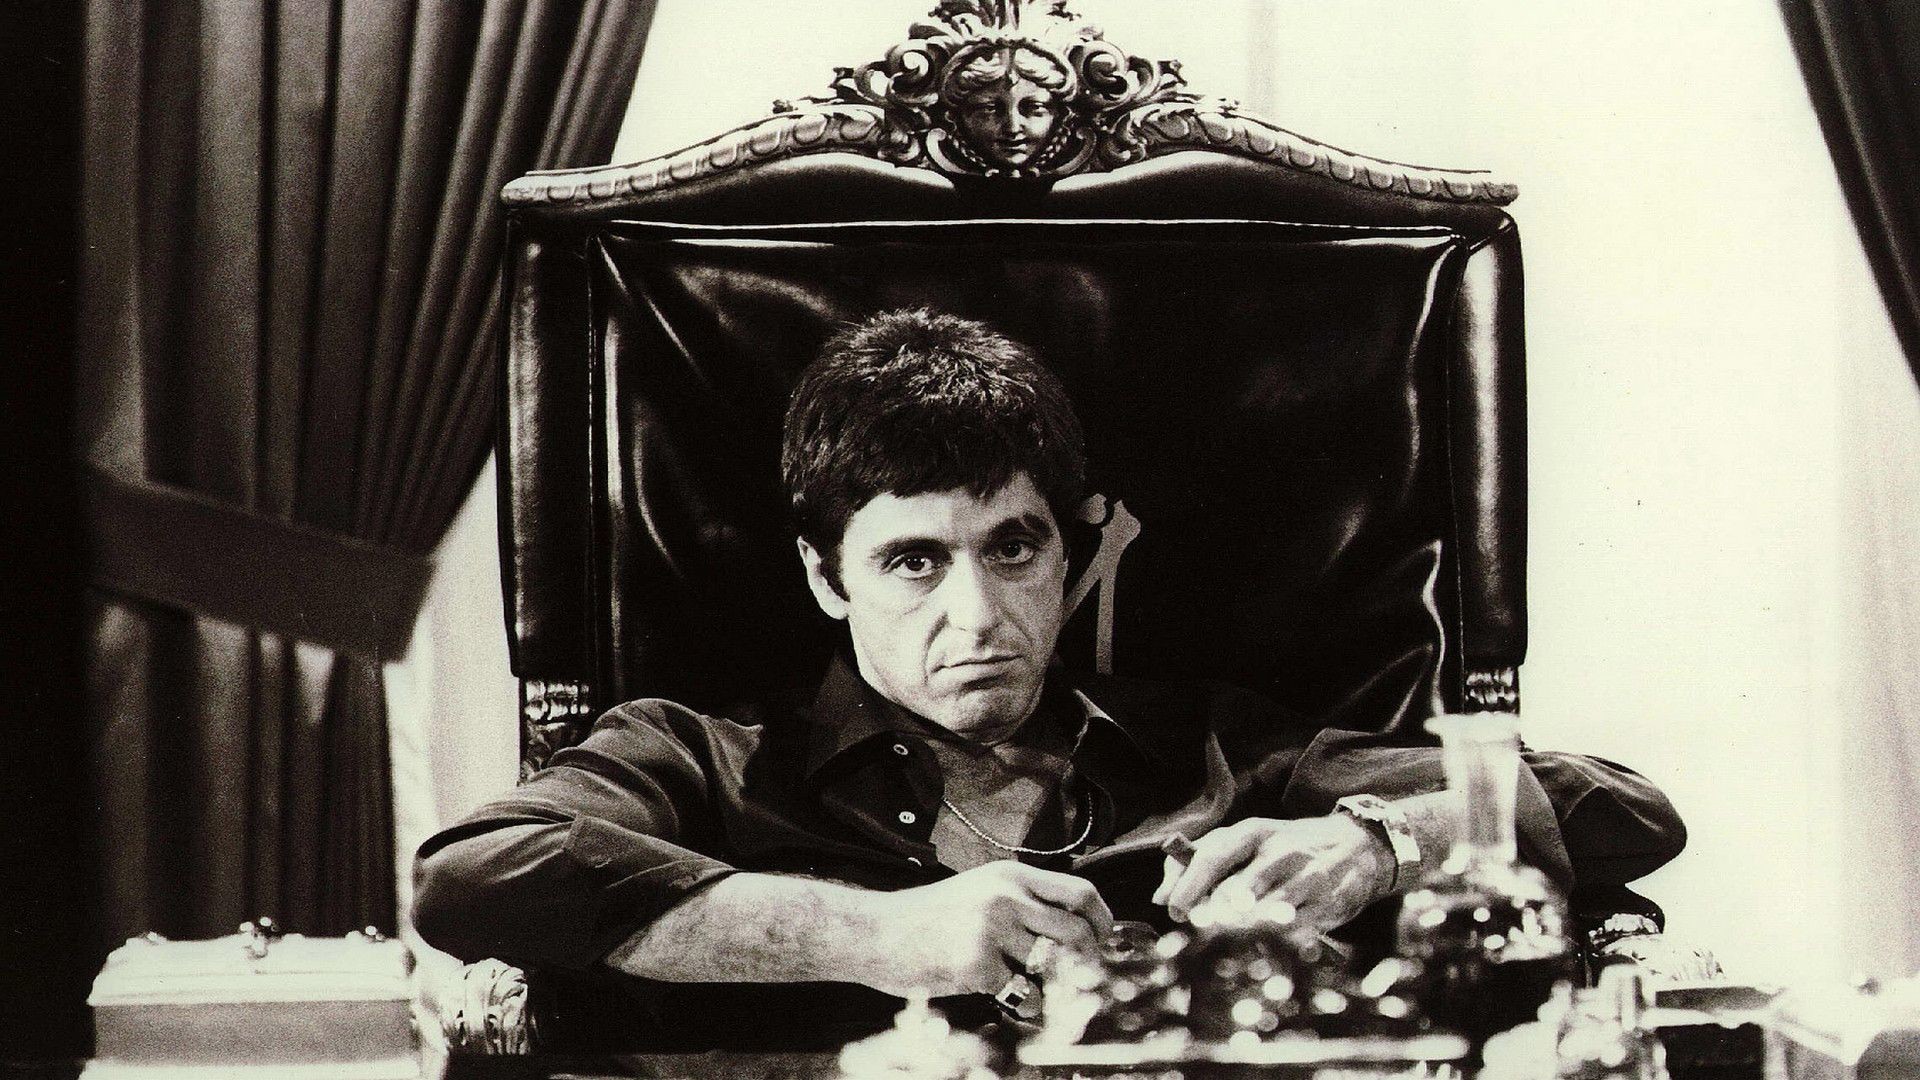 Scarface Wallpapers, Pictures Of Scarface - Scarface Wallpaper 4k - HD Wallpaper 